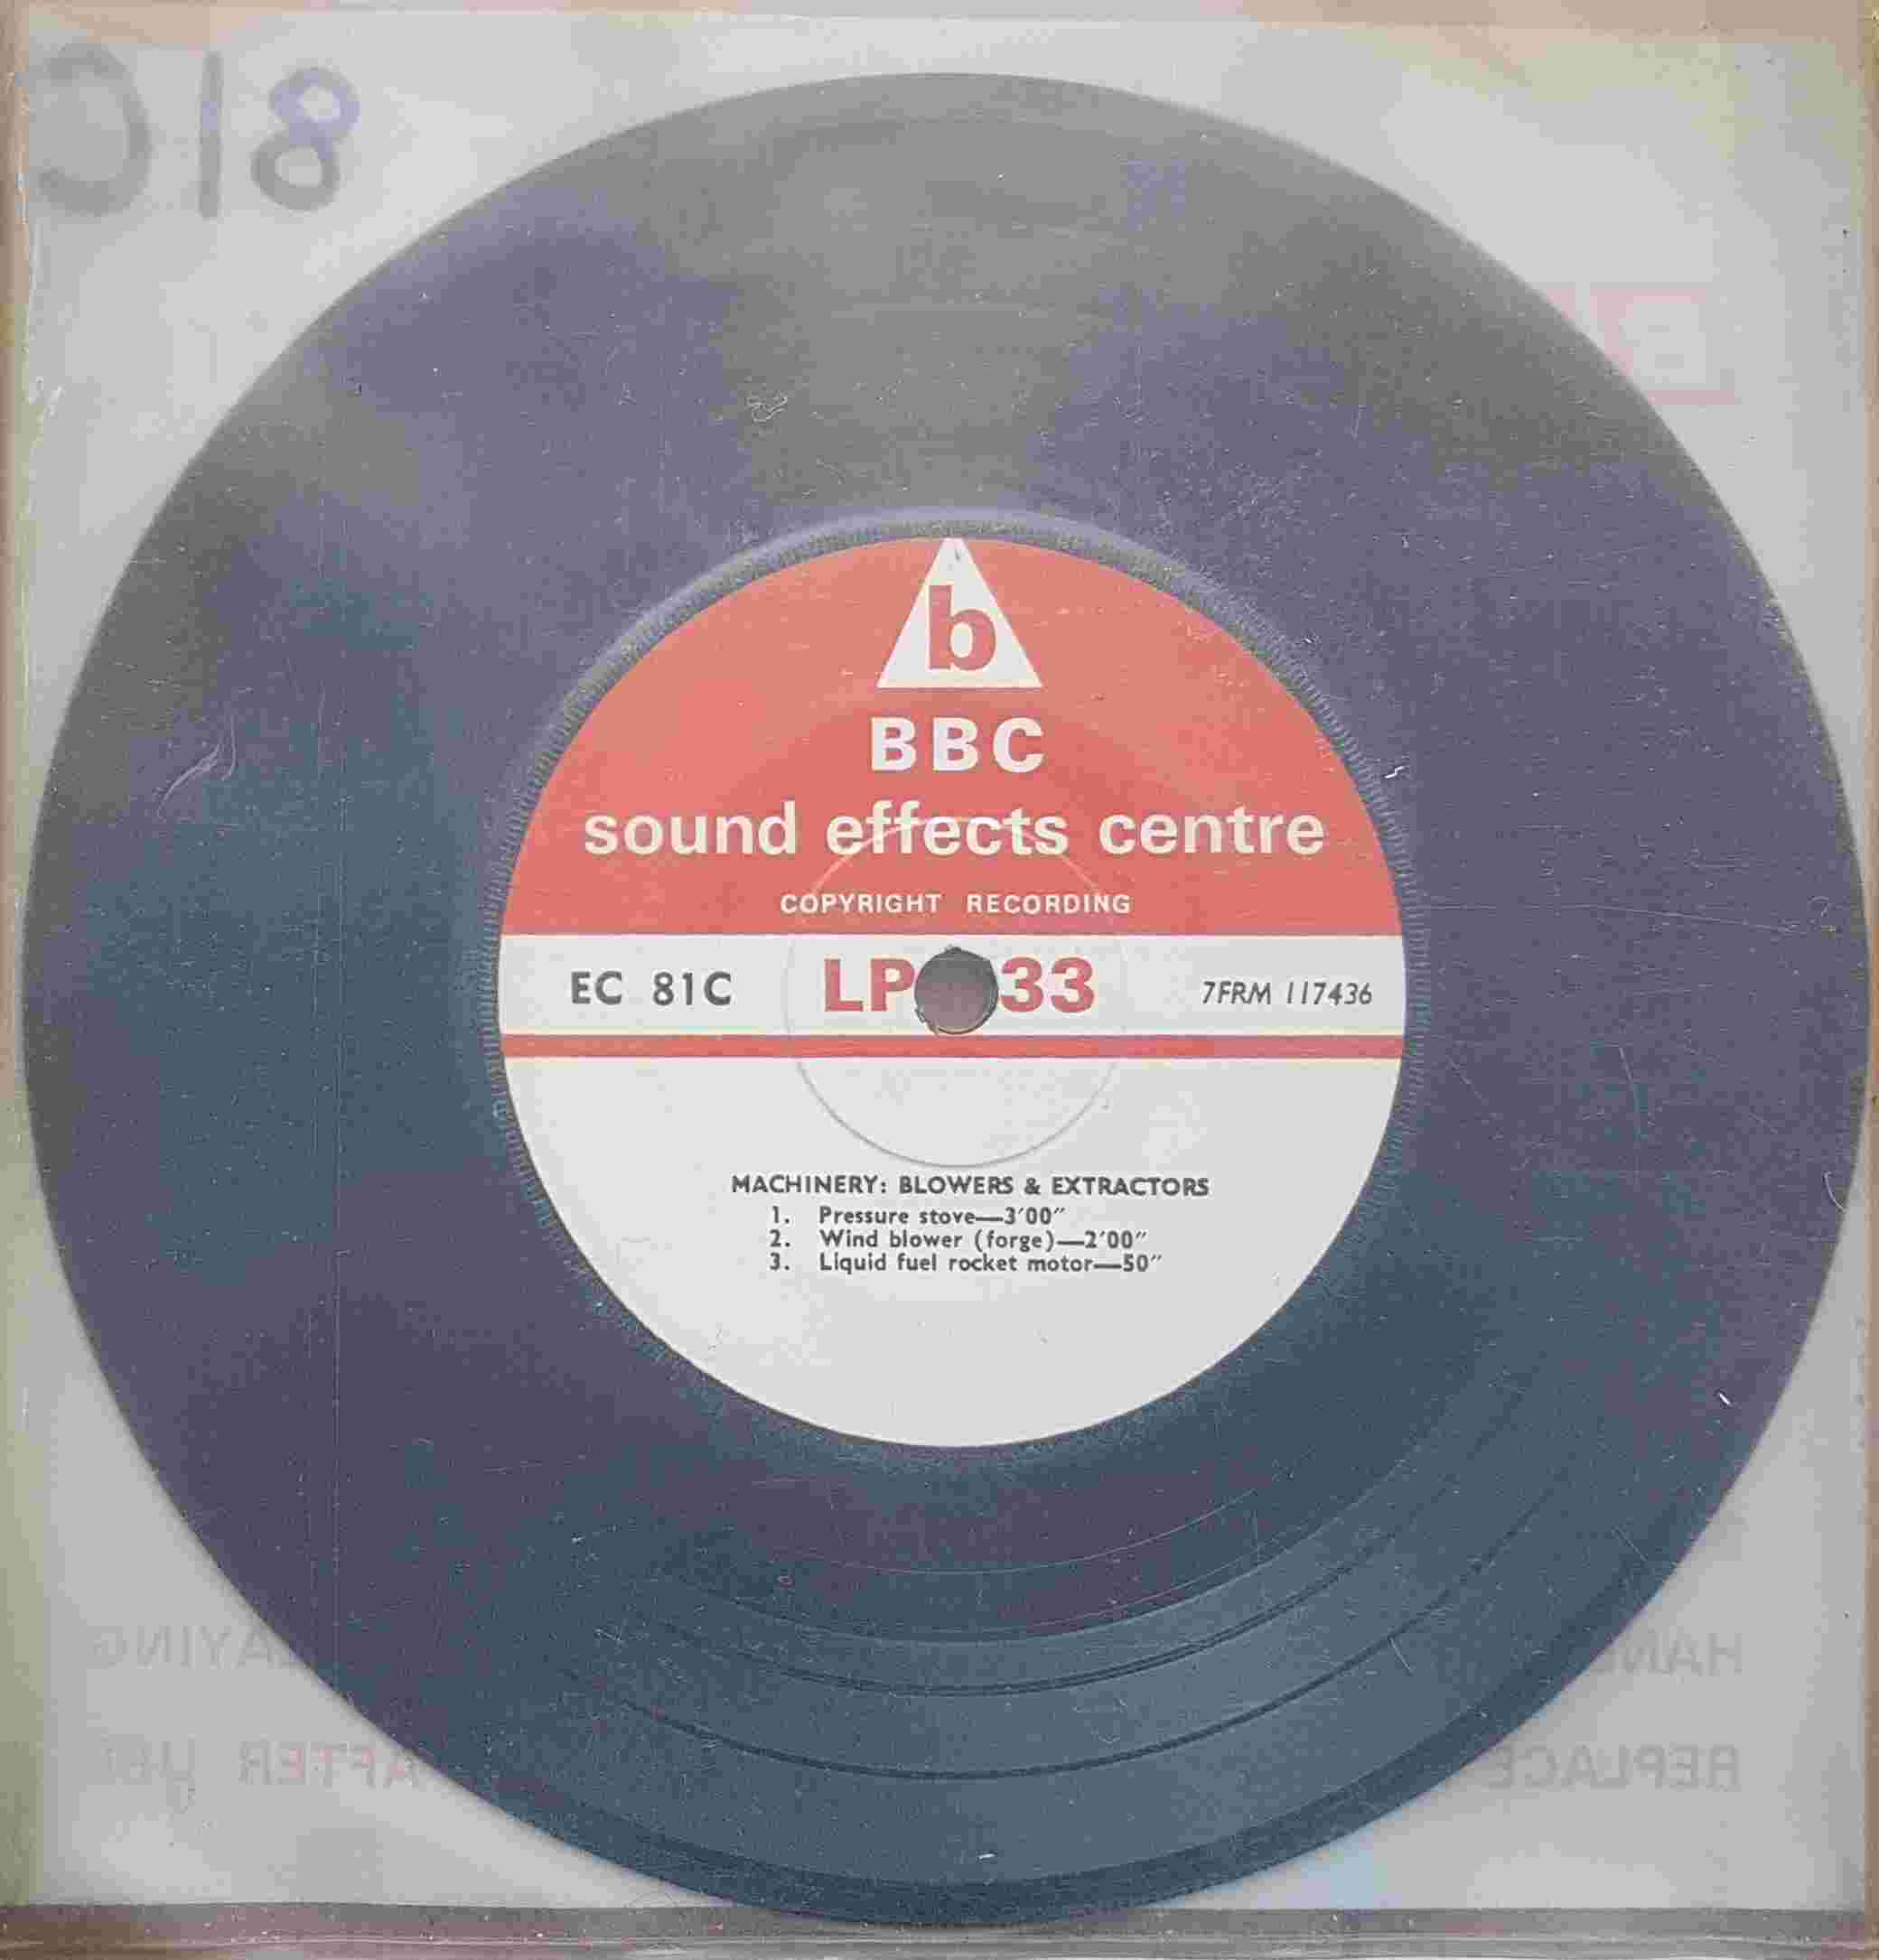 Picture of EC 81C Machinery: Blowers & extractors by artist Not registered from the BBC records and Tapes library